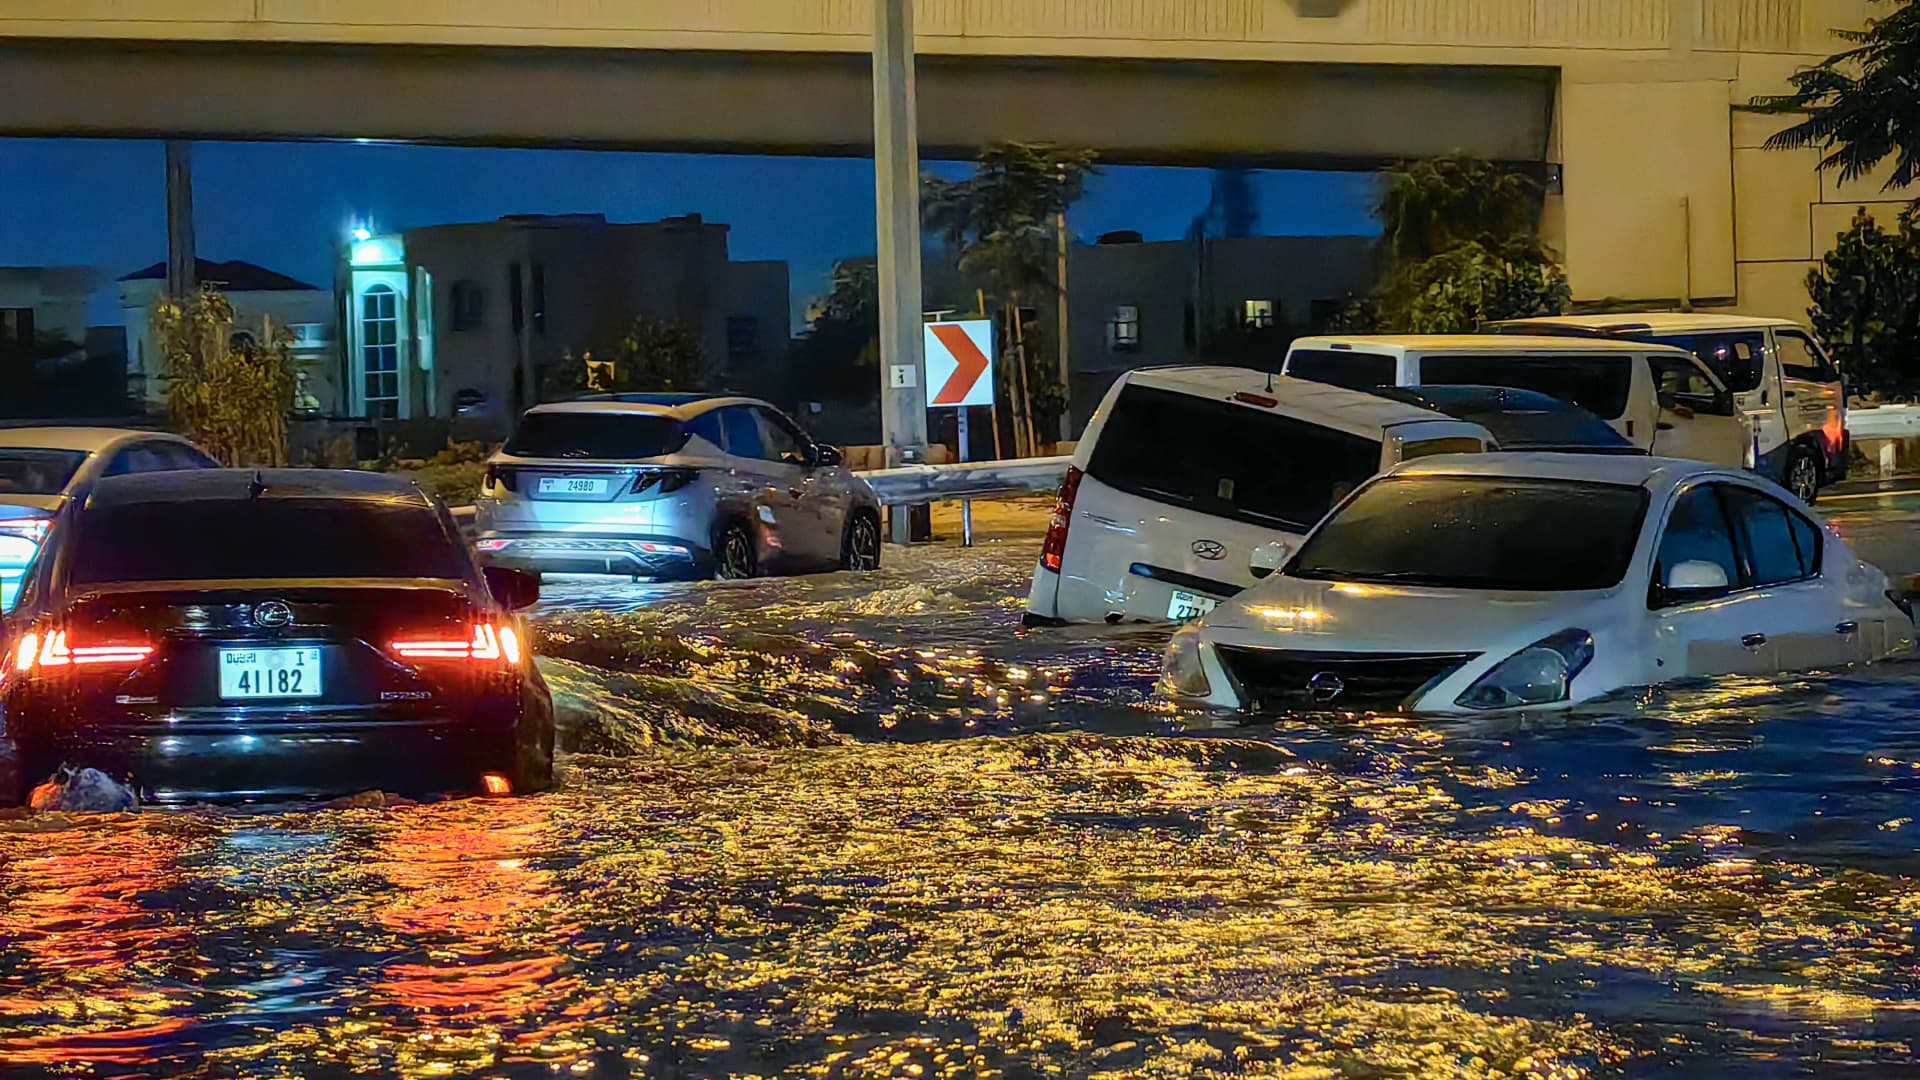 Dubai property boss says floods were overexaggerated: 'Things like that happen in Miami regularly'